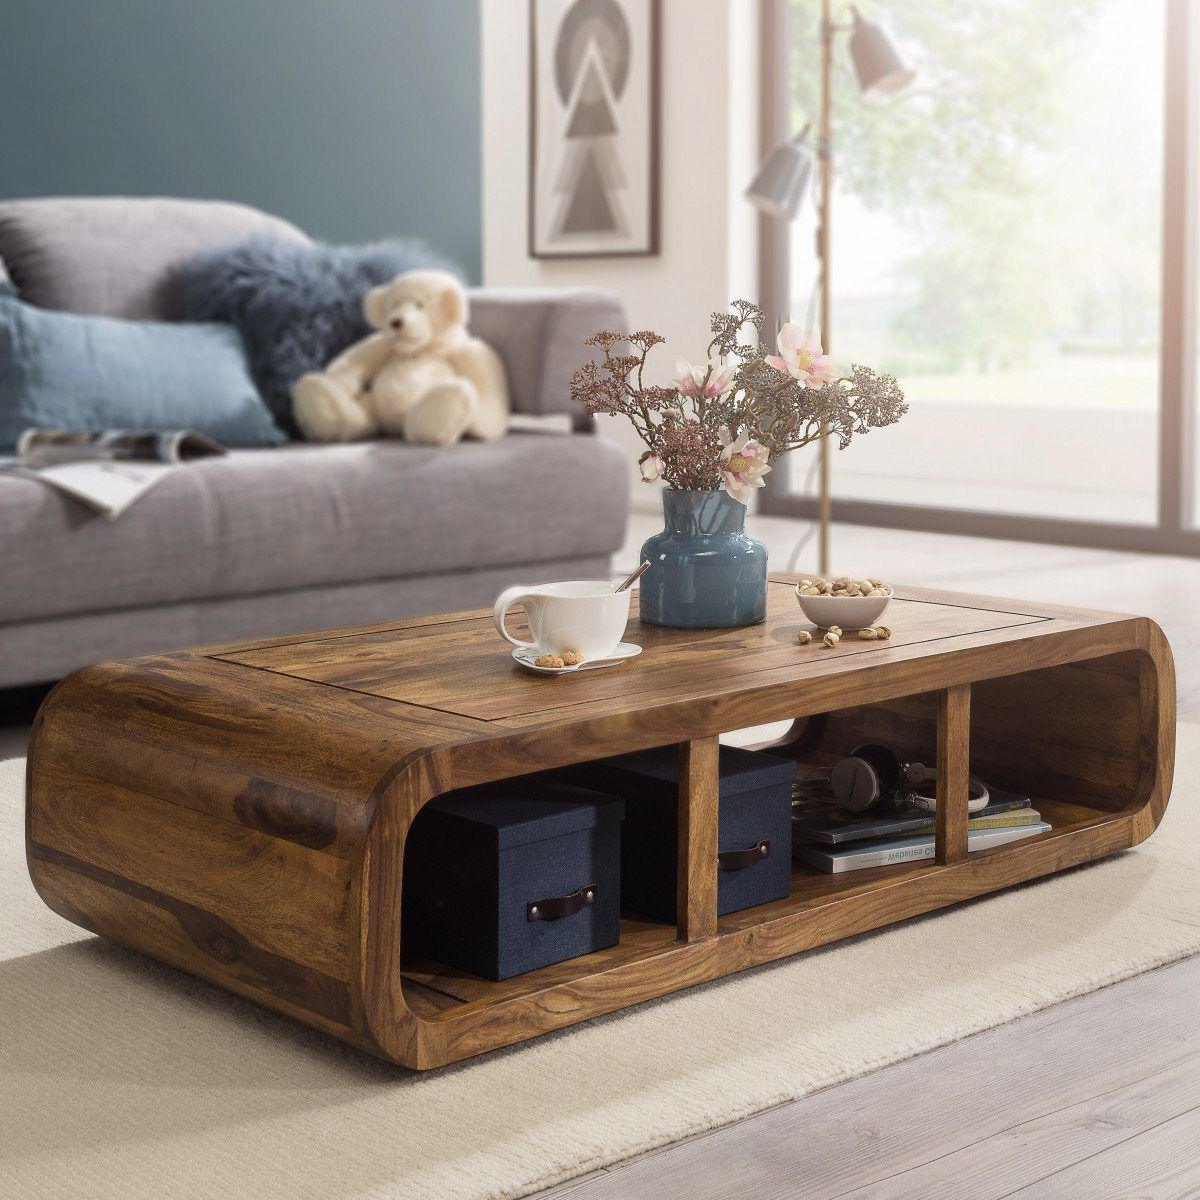 Newest Modern Wooden X Design Coffee Tables Throughout Solid Wood Coffee Table / Vidaxl Coffee Table Solid Sheesham Wood (View 11 of 15)